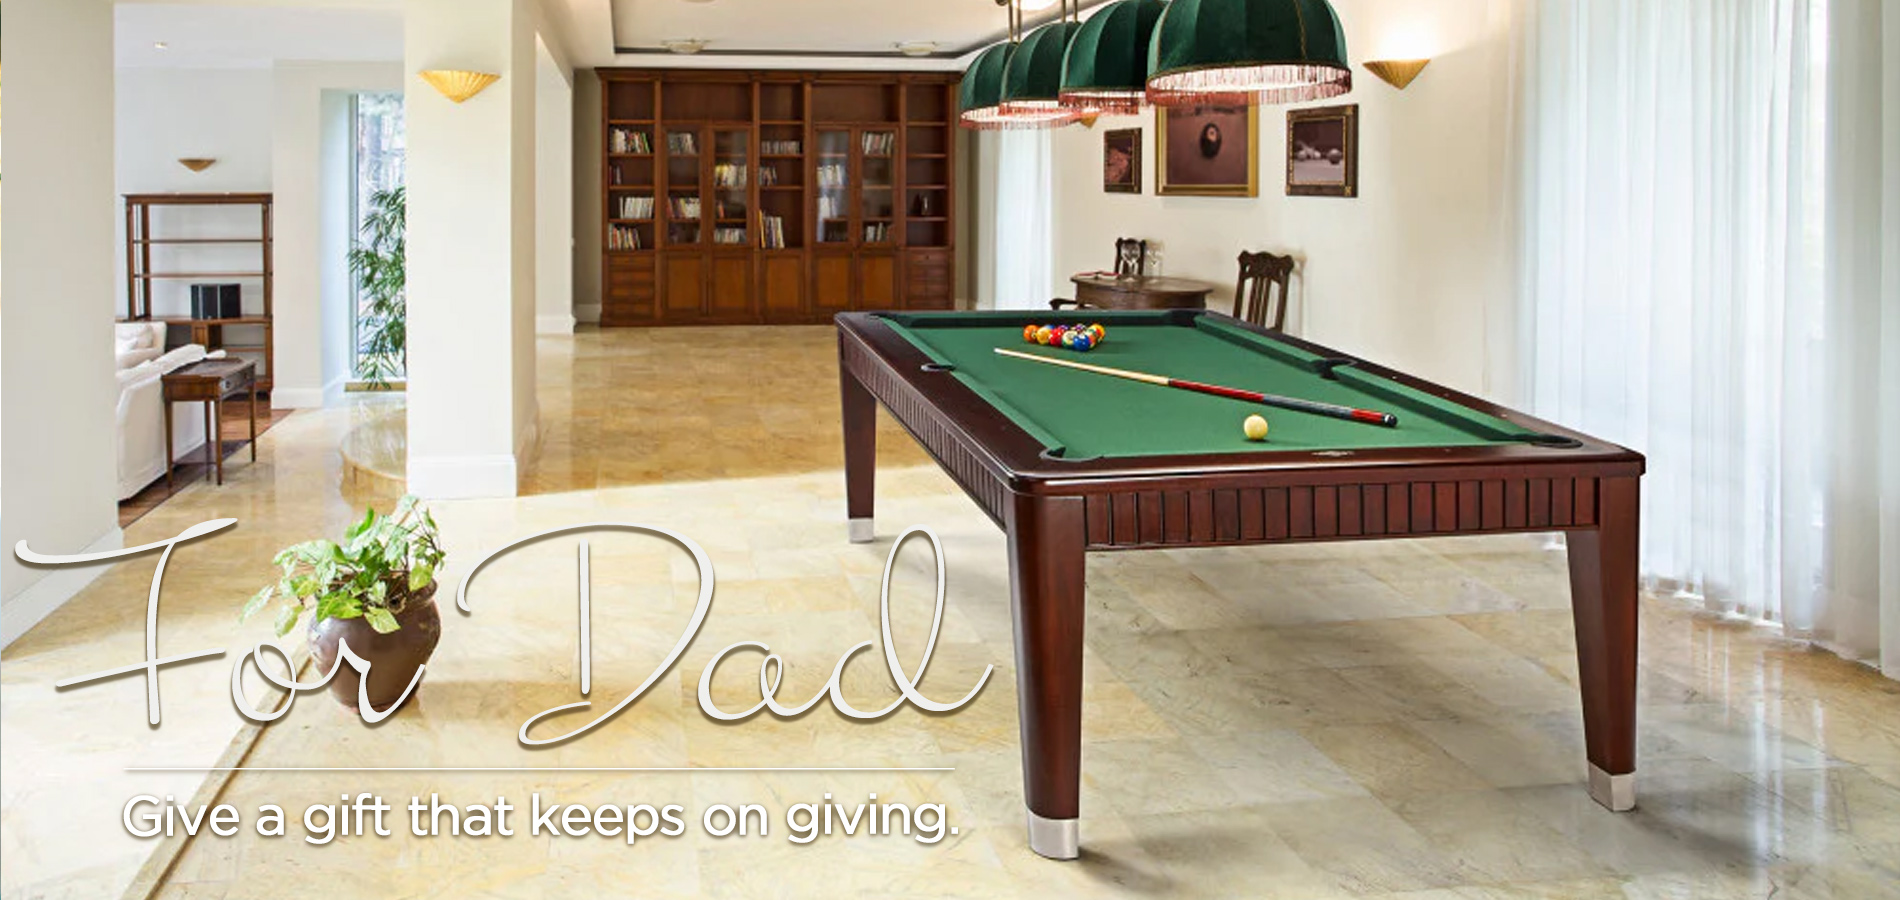 Give Dad a gift that keeps on giving! From billiard tables to chat sets, we have everything for a fun, relaxing getaway for the whole family to enjoy!